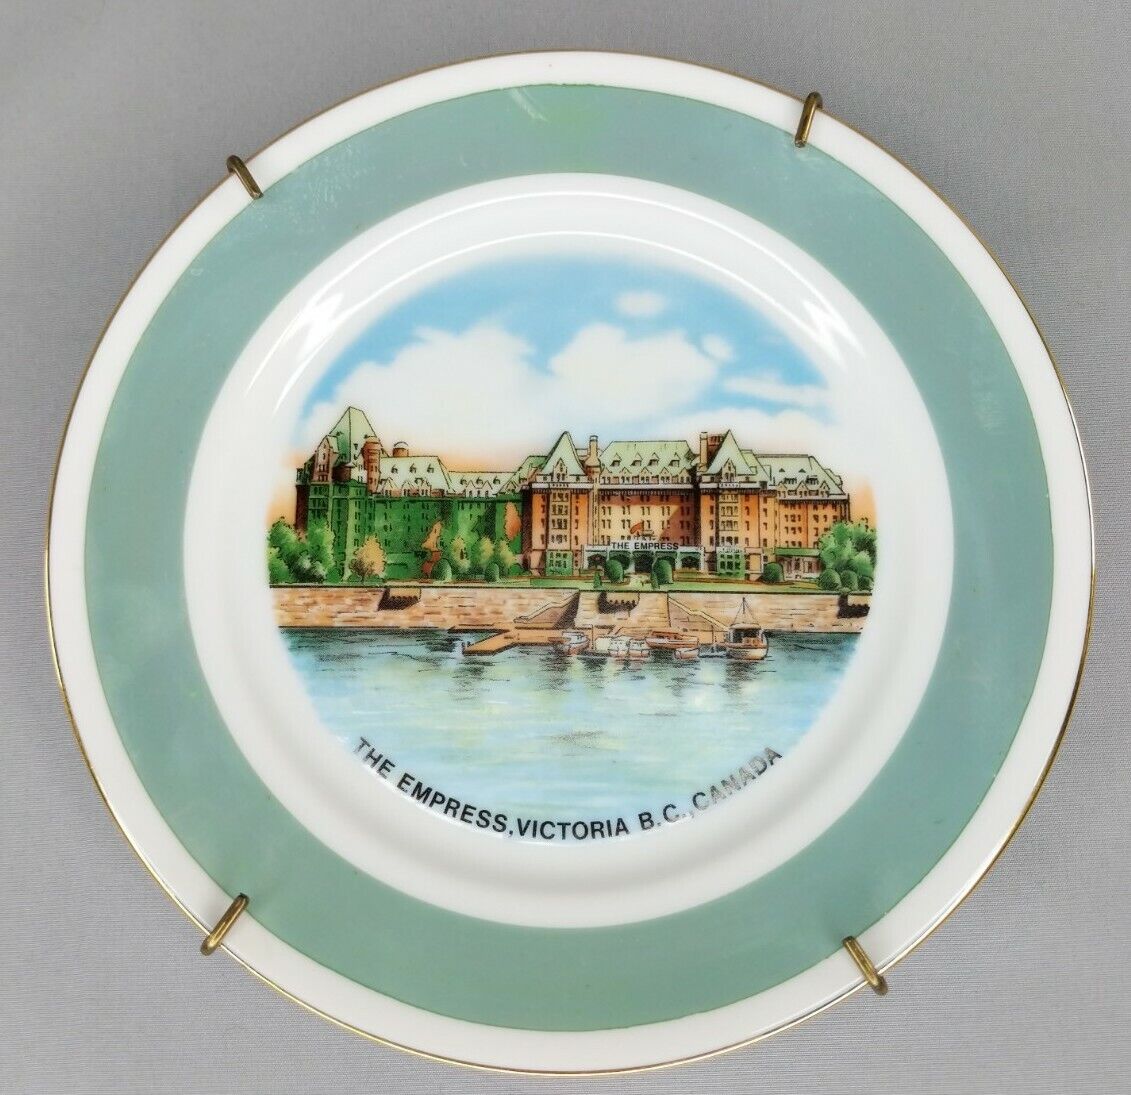 The Empress Hotel Victoria B.C. Canada 6.5 inch Collectors Plate with Hanger